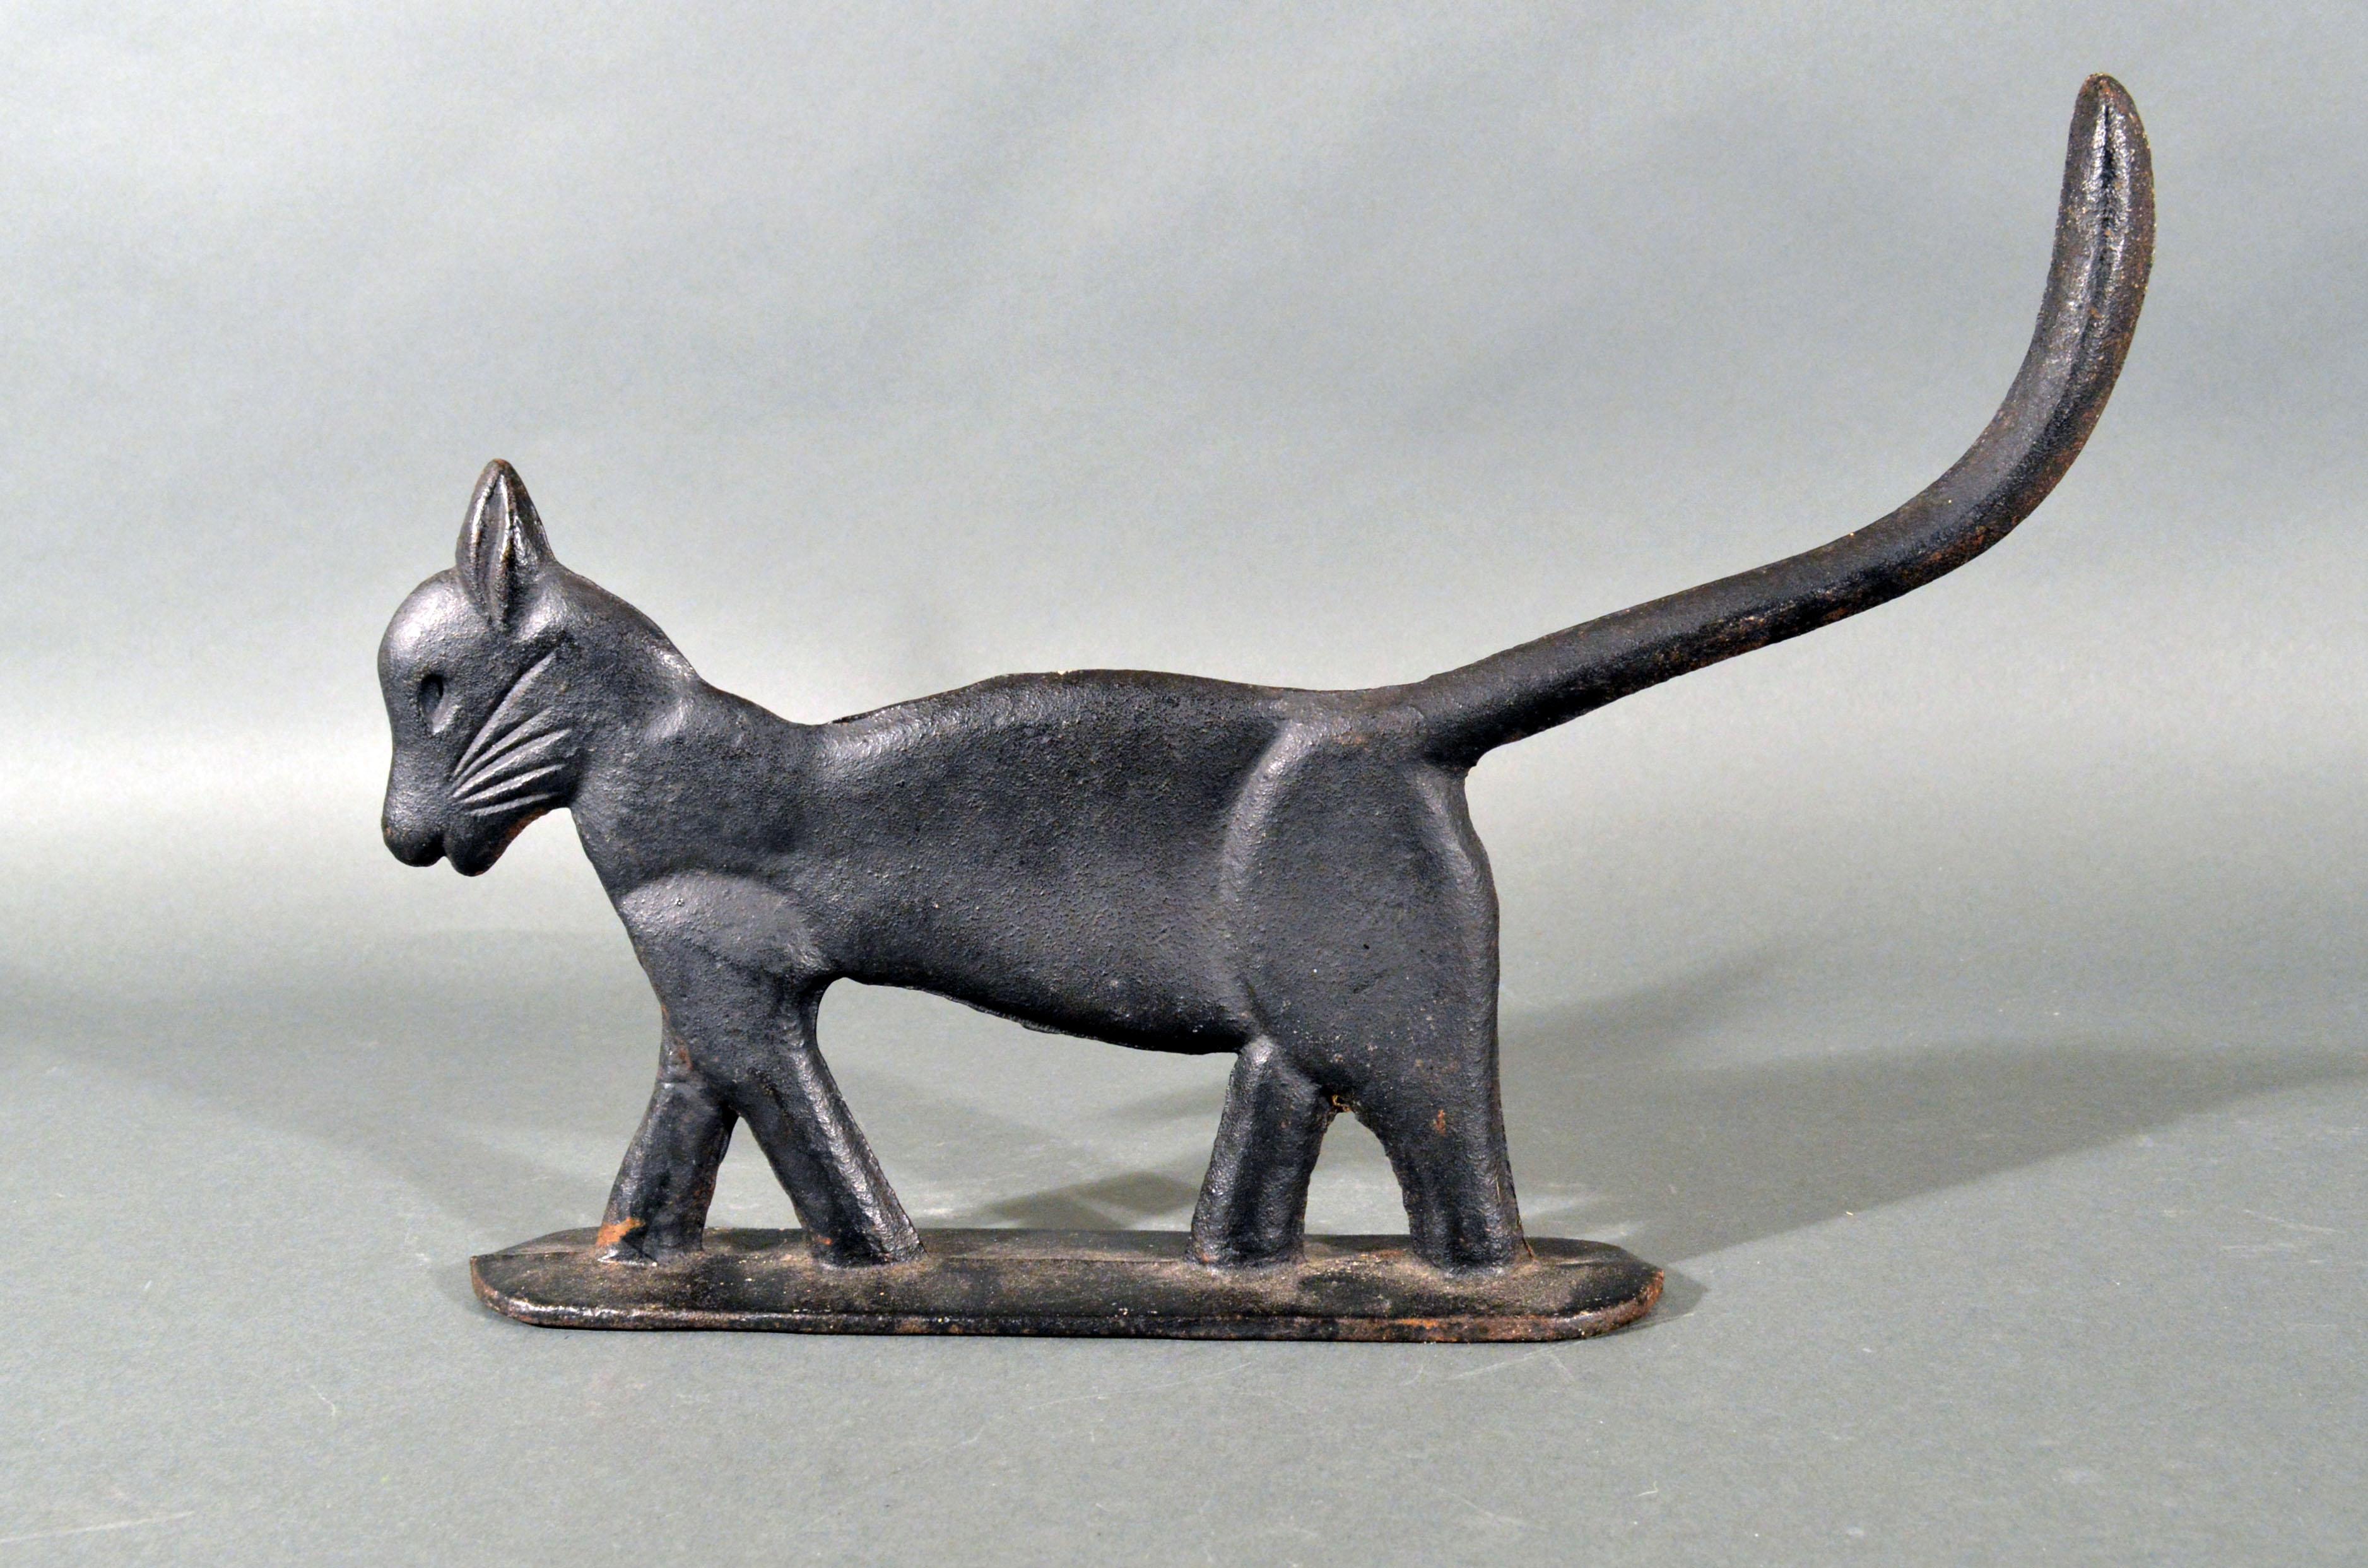 American cast iron sculpture or boot scrapper of a cat,
circa 1920s
 

The lovely American cast iron rare striding cat boot scraper in original black paint has a silhouette of a flattened, full-body form of a cat with a dramatic profile: it's